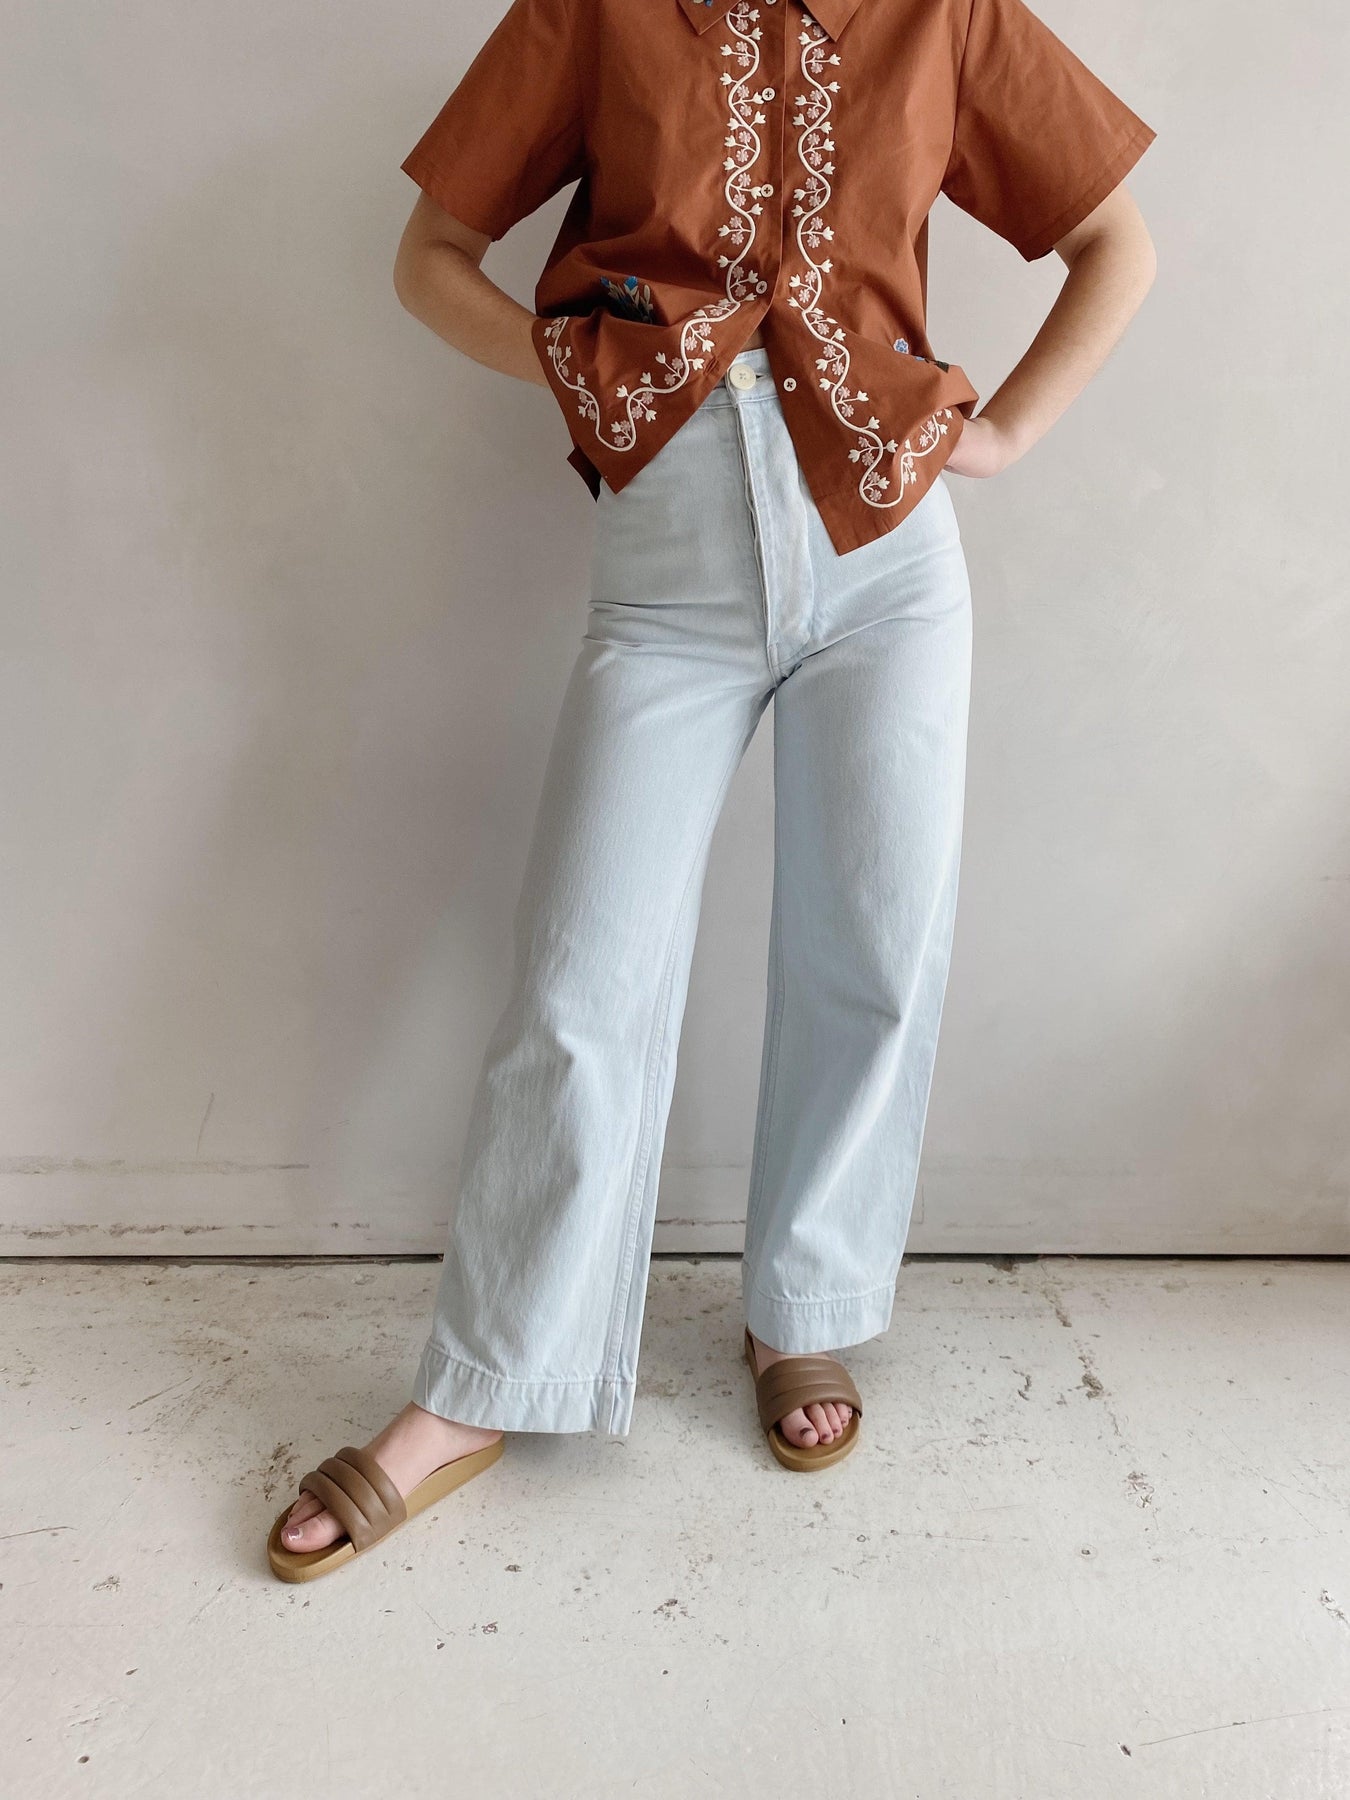 Idun  Jesse Kamm Sailor Pants in Palomino Fine Corduroy Only a few left  Now part of the Winter Sale Use code SISTE at checkout for an extra 20  off sale   